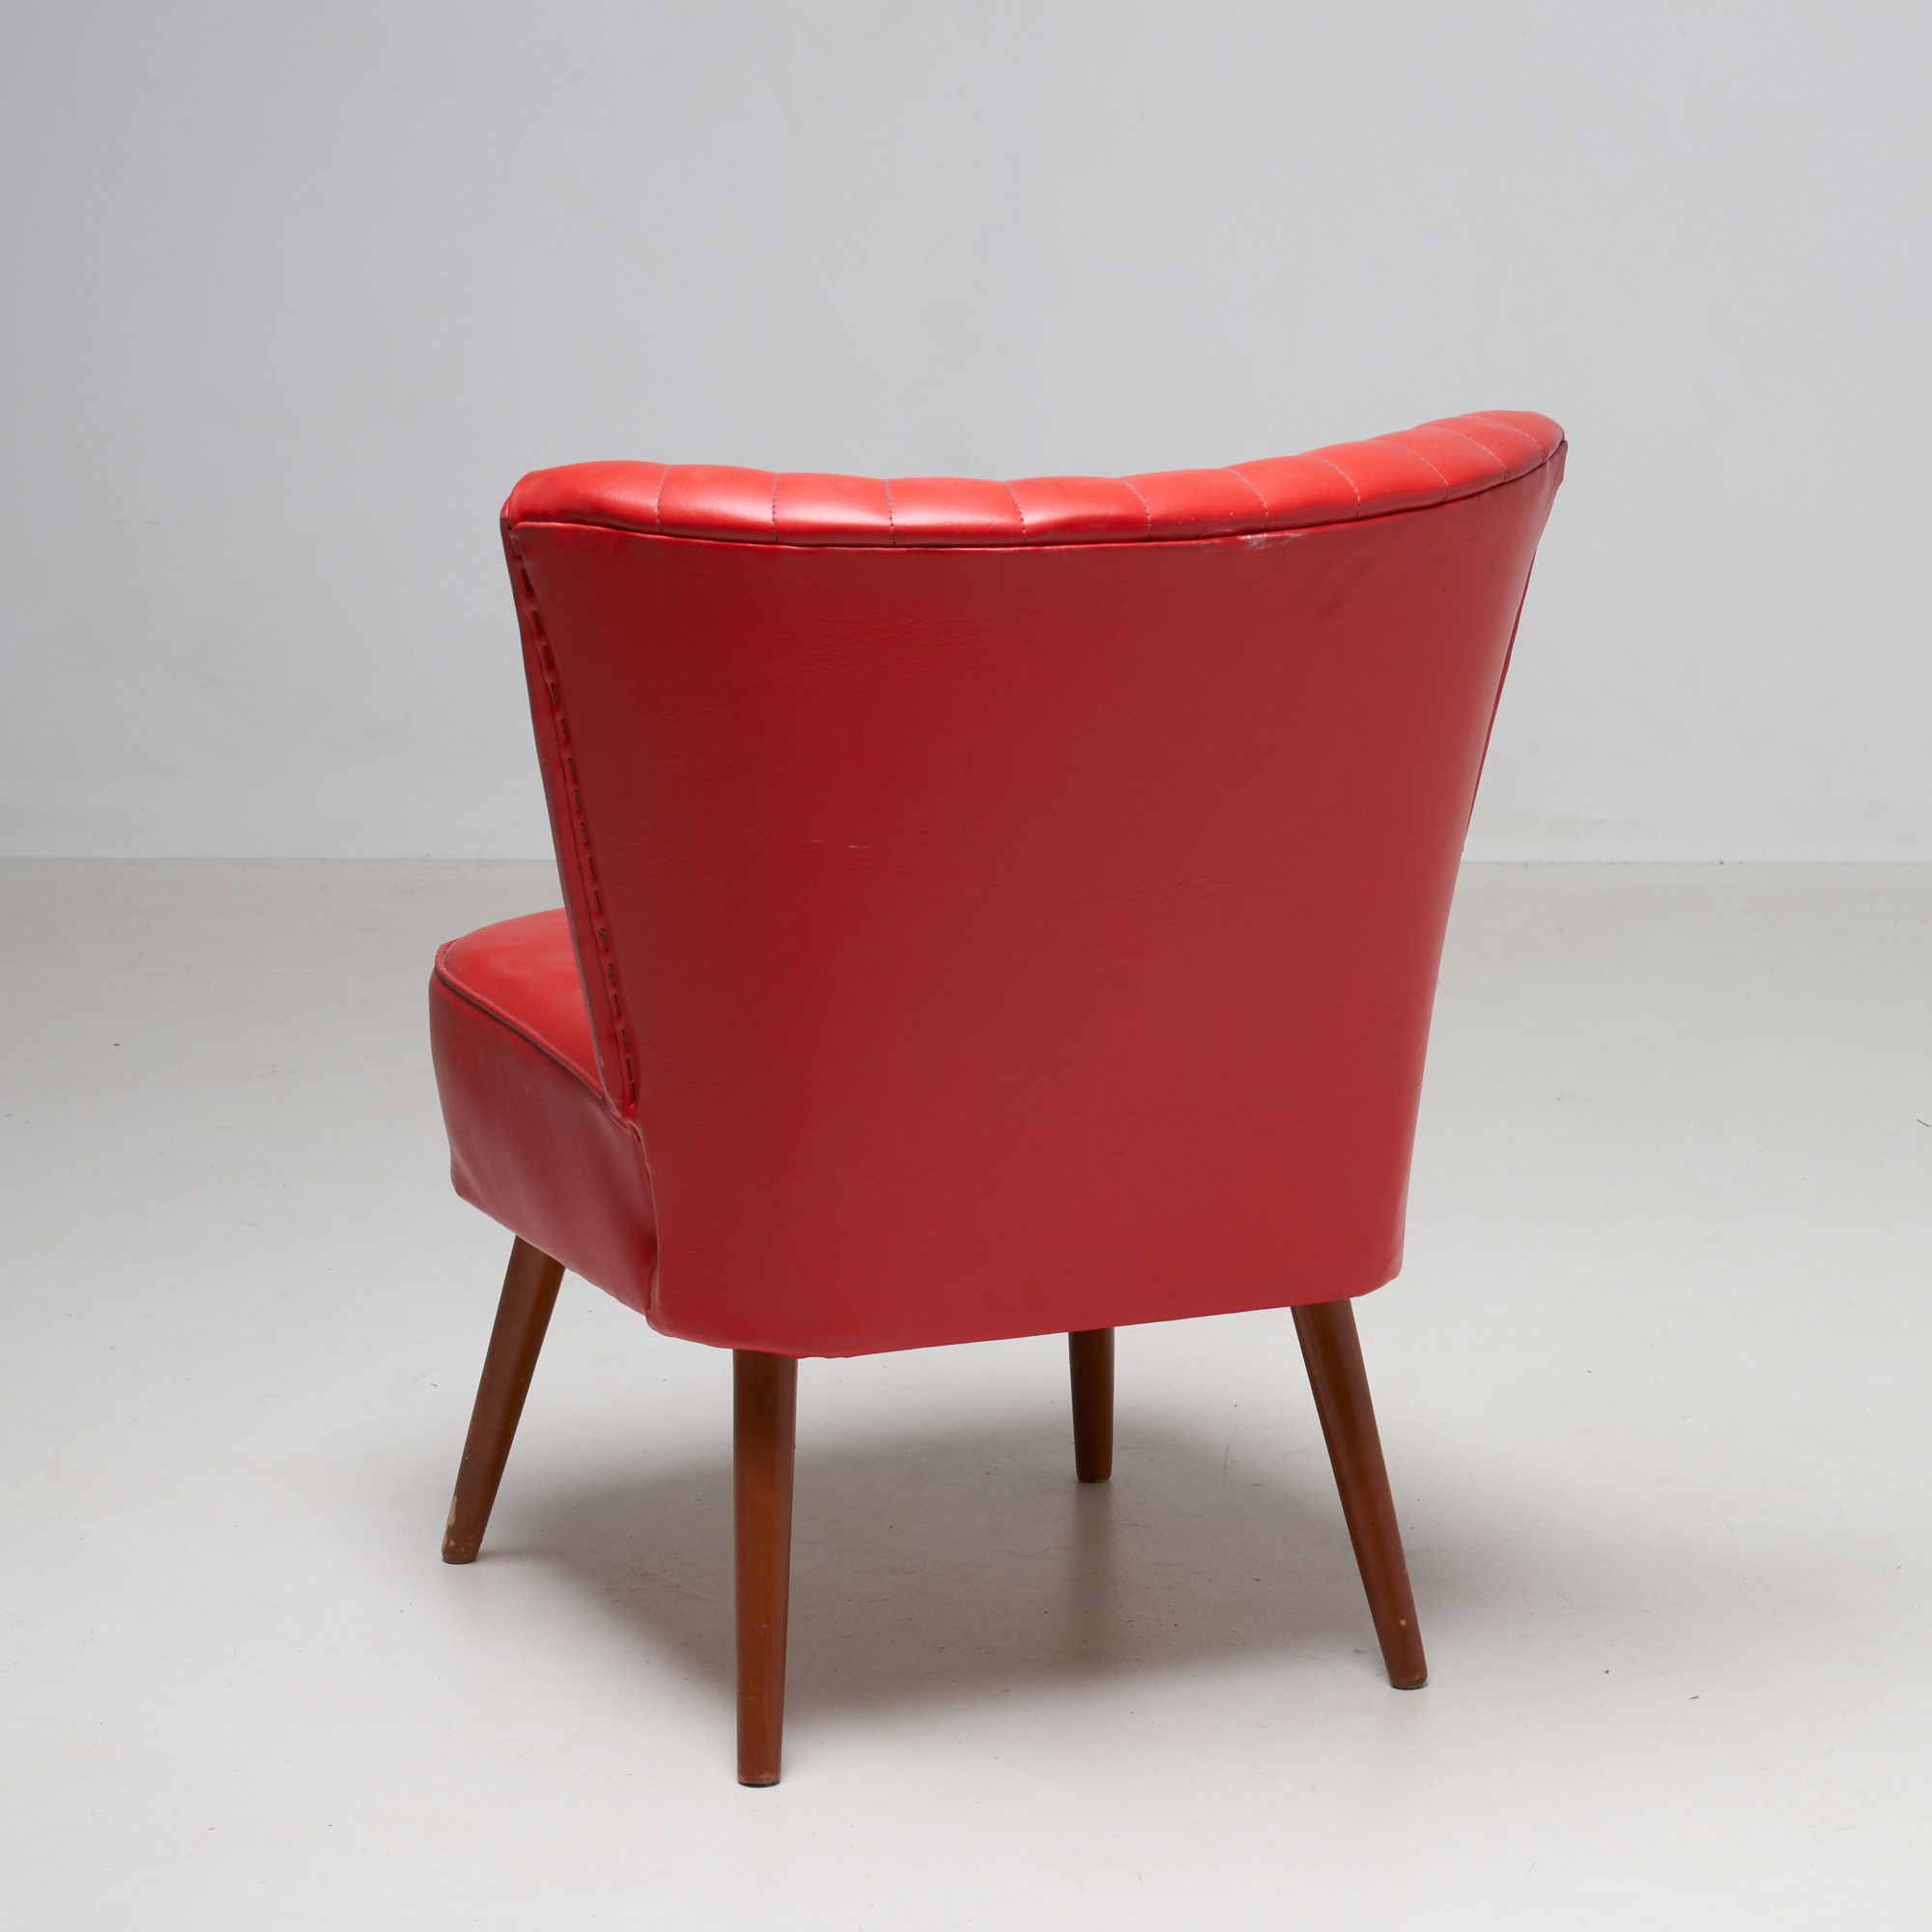 CHARMING VINTAGE RED COCKTAIL CHAIR, NETHERLANDS, 1970s